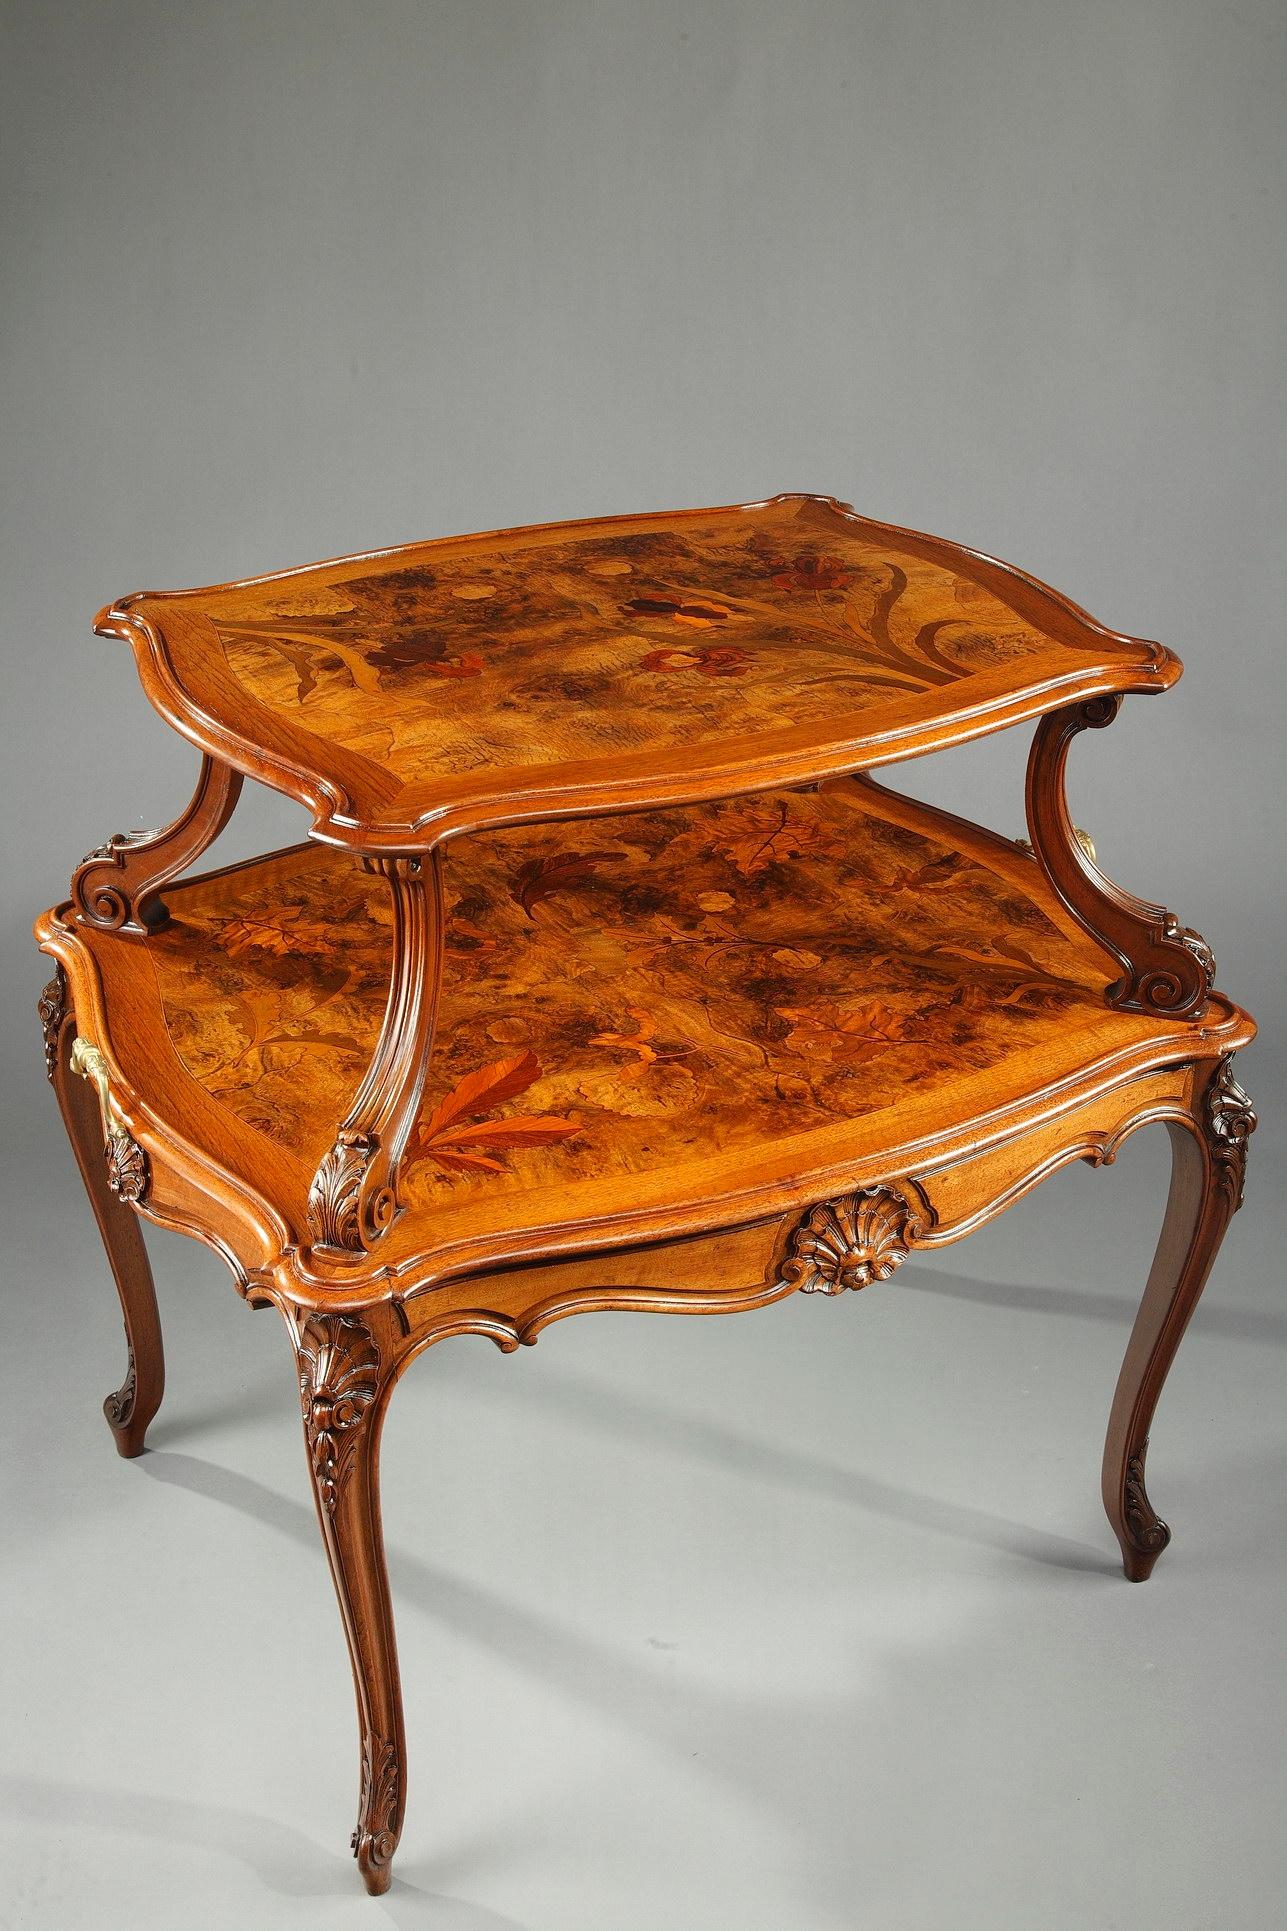 Wooden Tea Table with Polychrome Marquetry Decoration, Art Nouveau Period 4